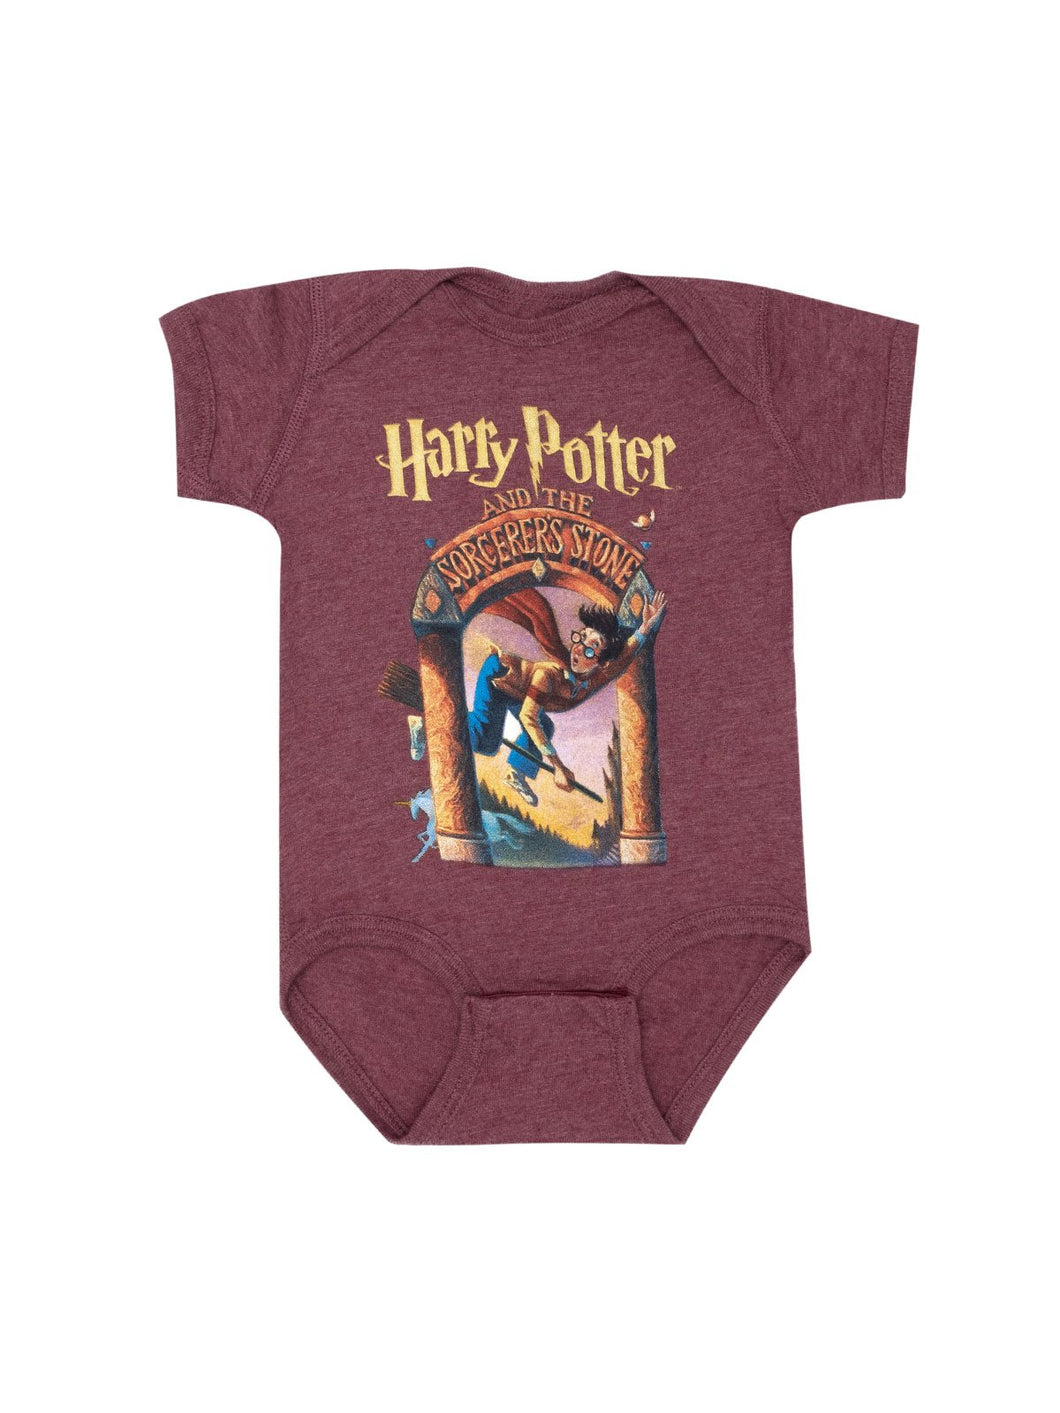 Harry Potter and the Sorcerer's Stone Bodysuit (12M)